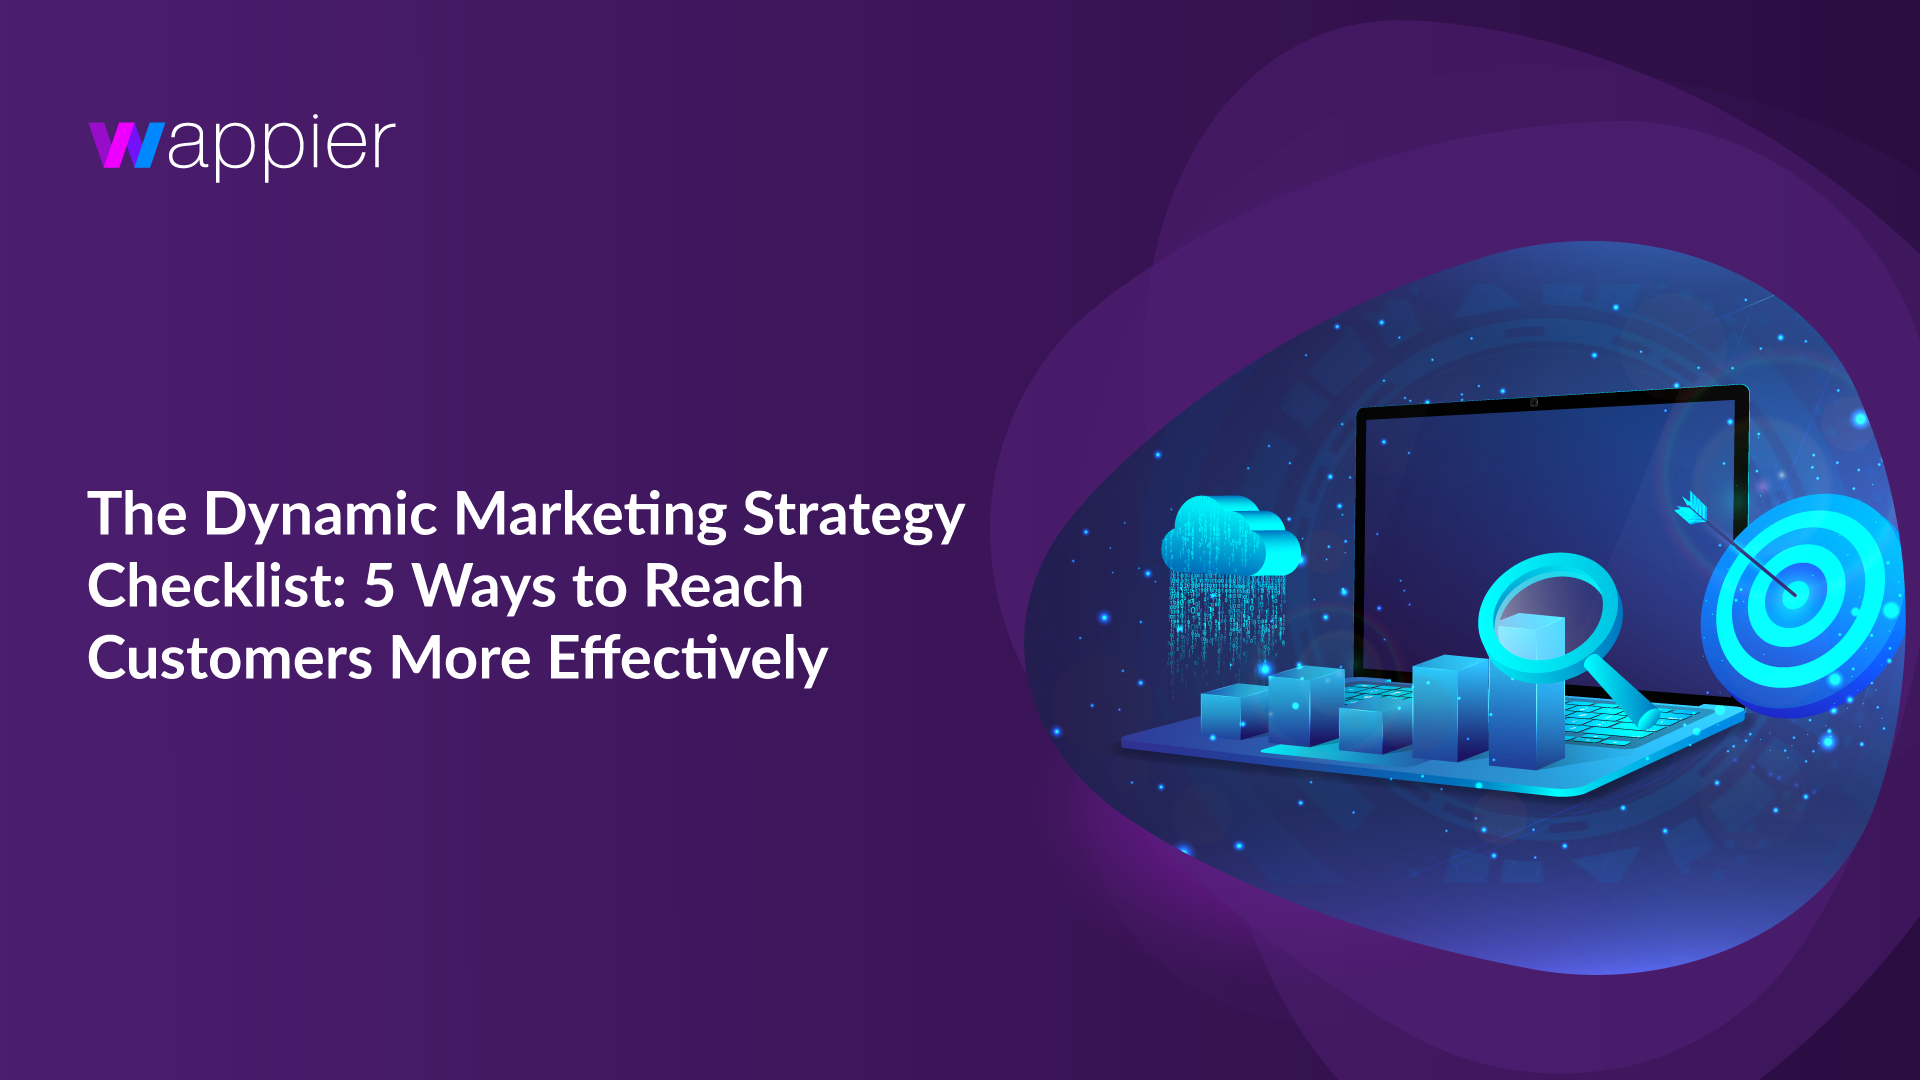 You are currently viewing The Dynamic Marketing Strategy Checklist: 5 Ways to Reach Customers More Effectively